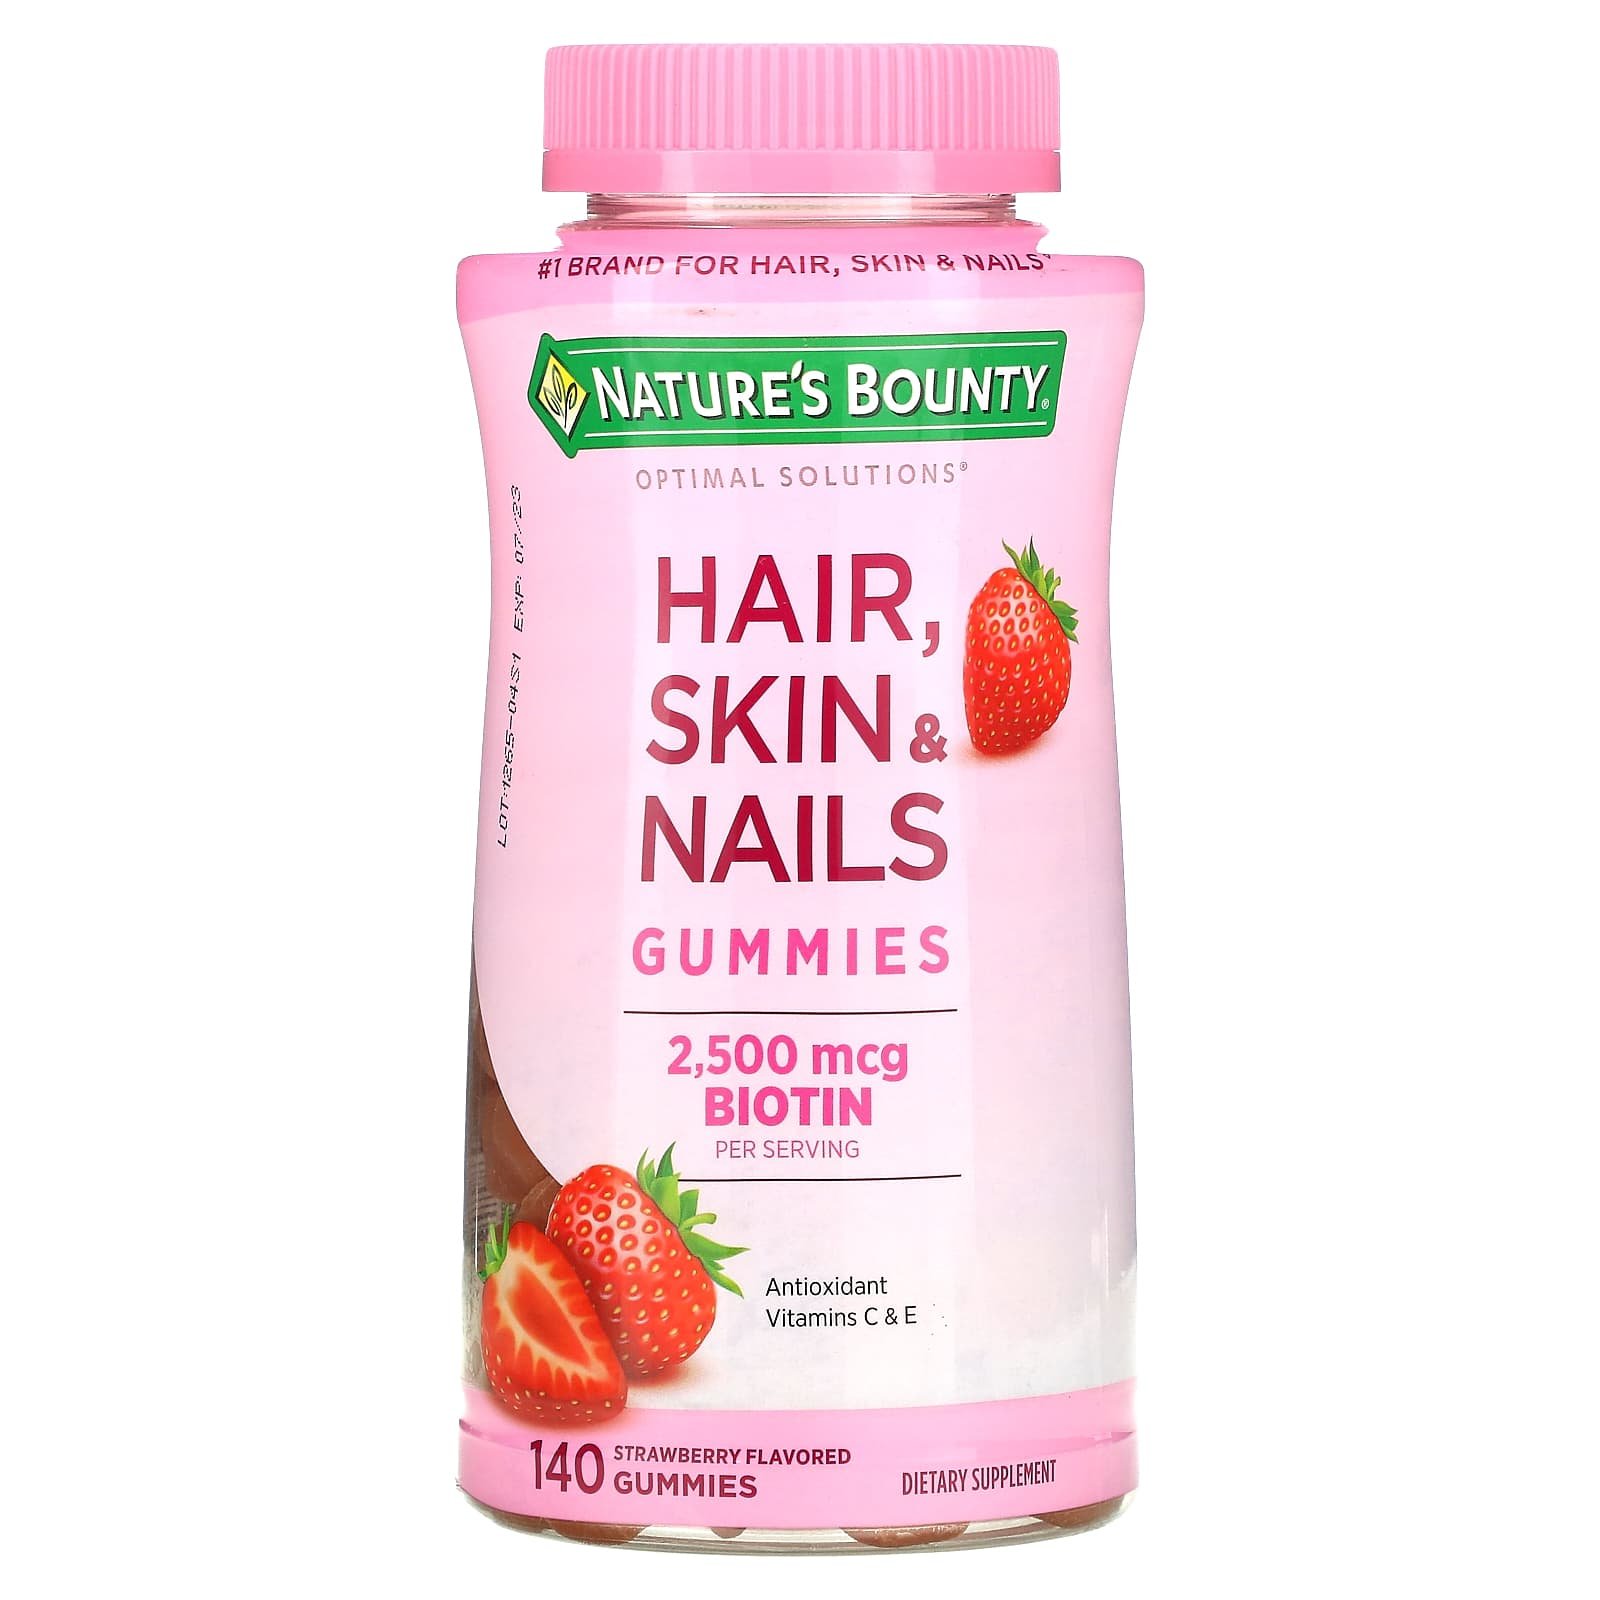 Natures Bounty Hair Skin And Nails Gummies With 2500 Mcg Biotin To